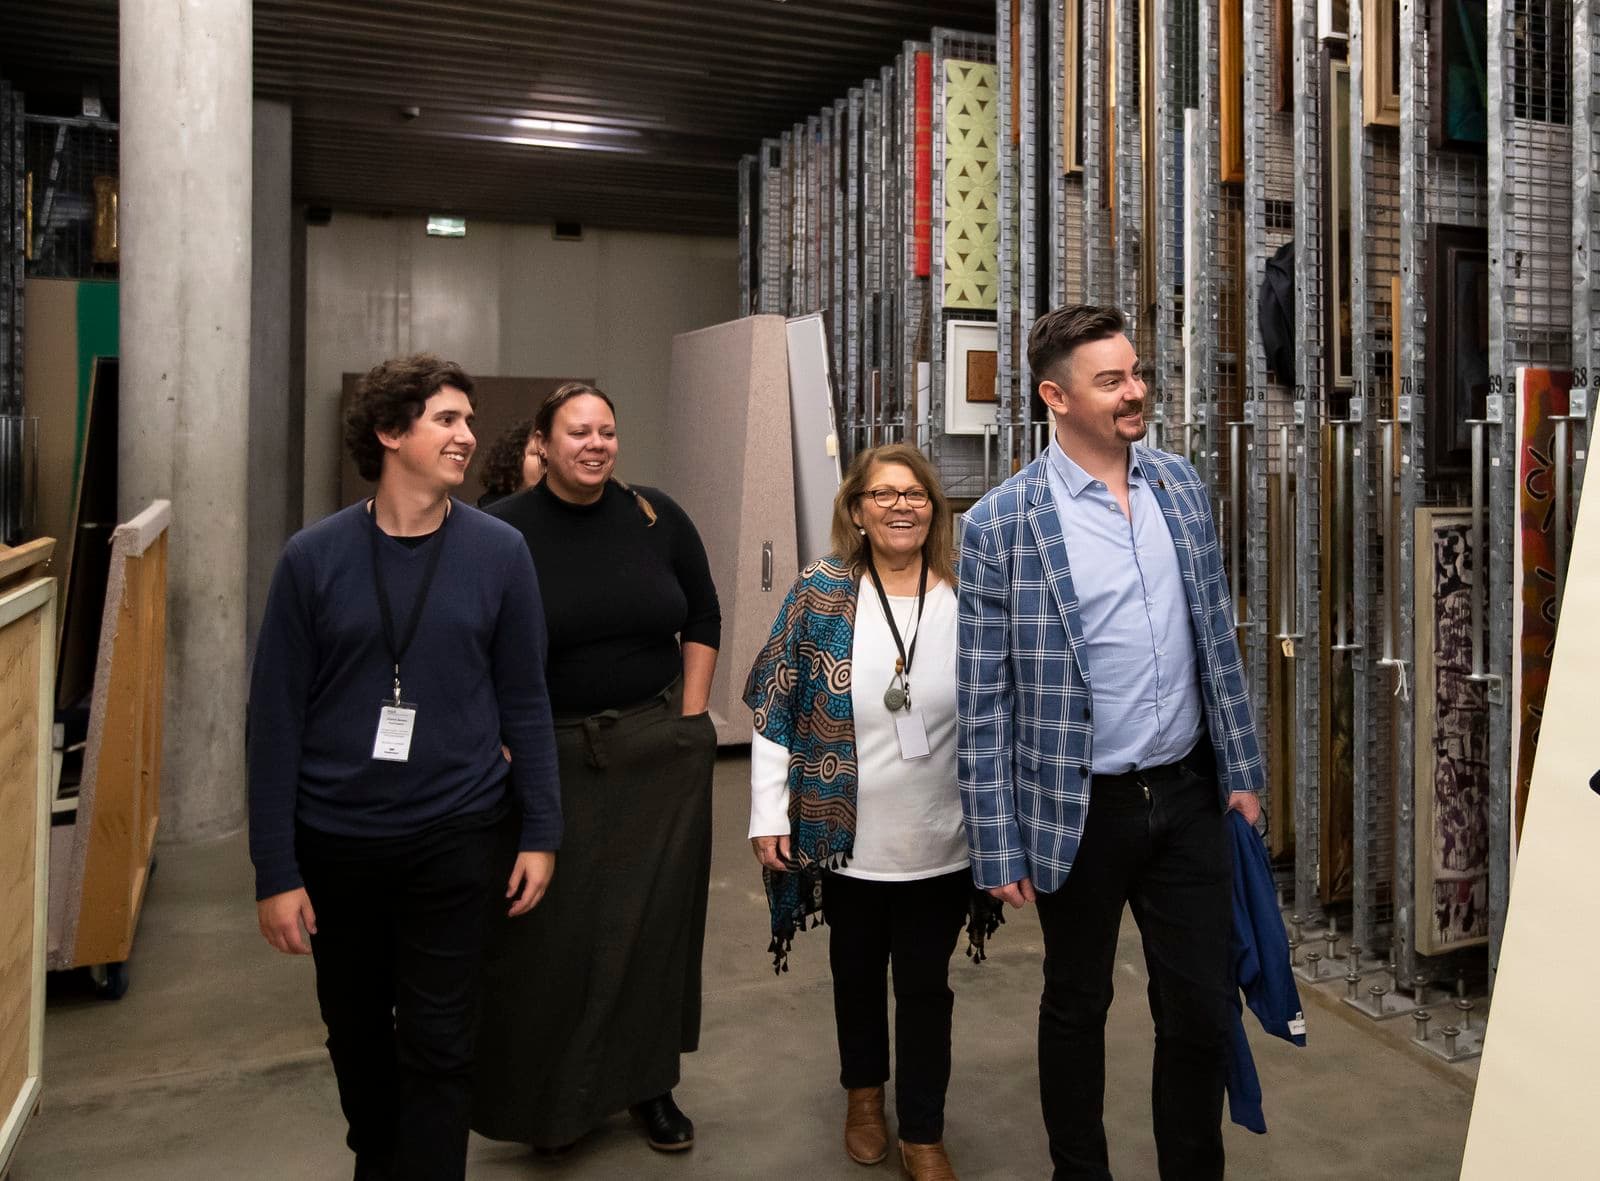 Four people are walking in a large painting storage room, with many paintings hanging in tall wire storage racks